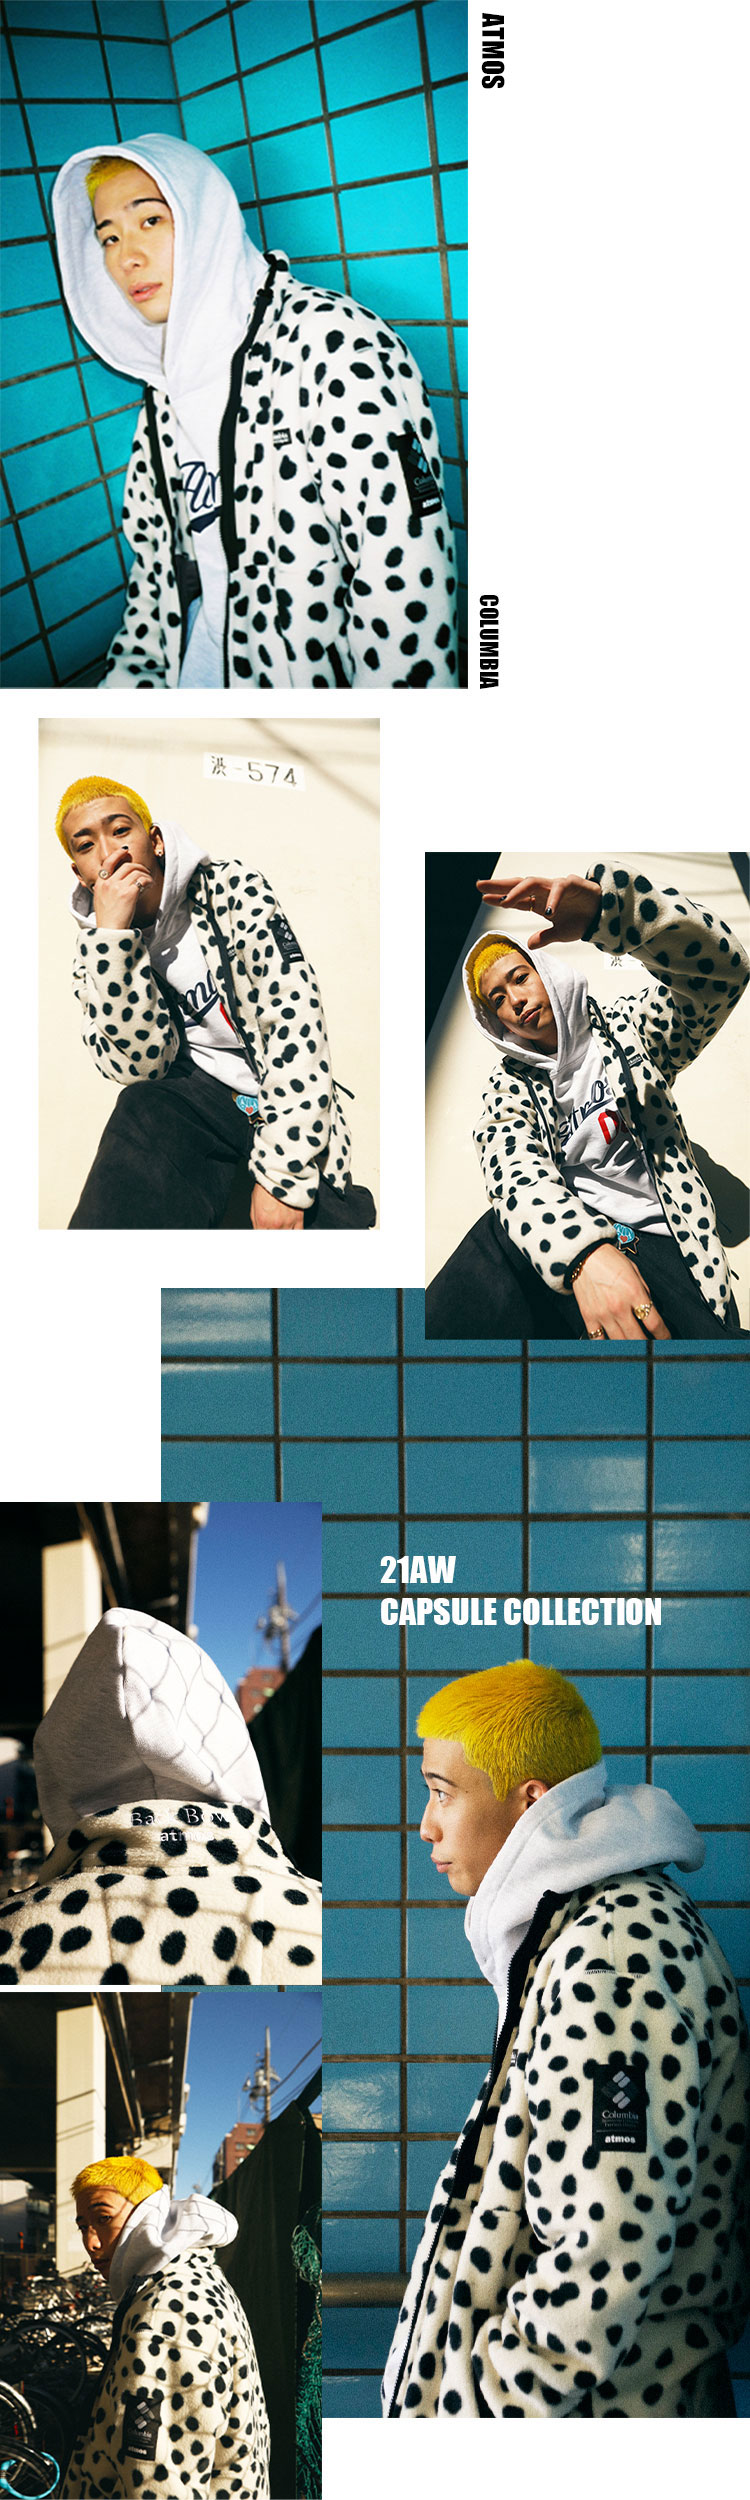 atmos x COLUMBIA 21AW CAPSULE COLLECTION